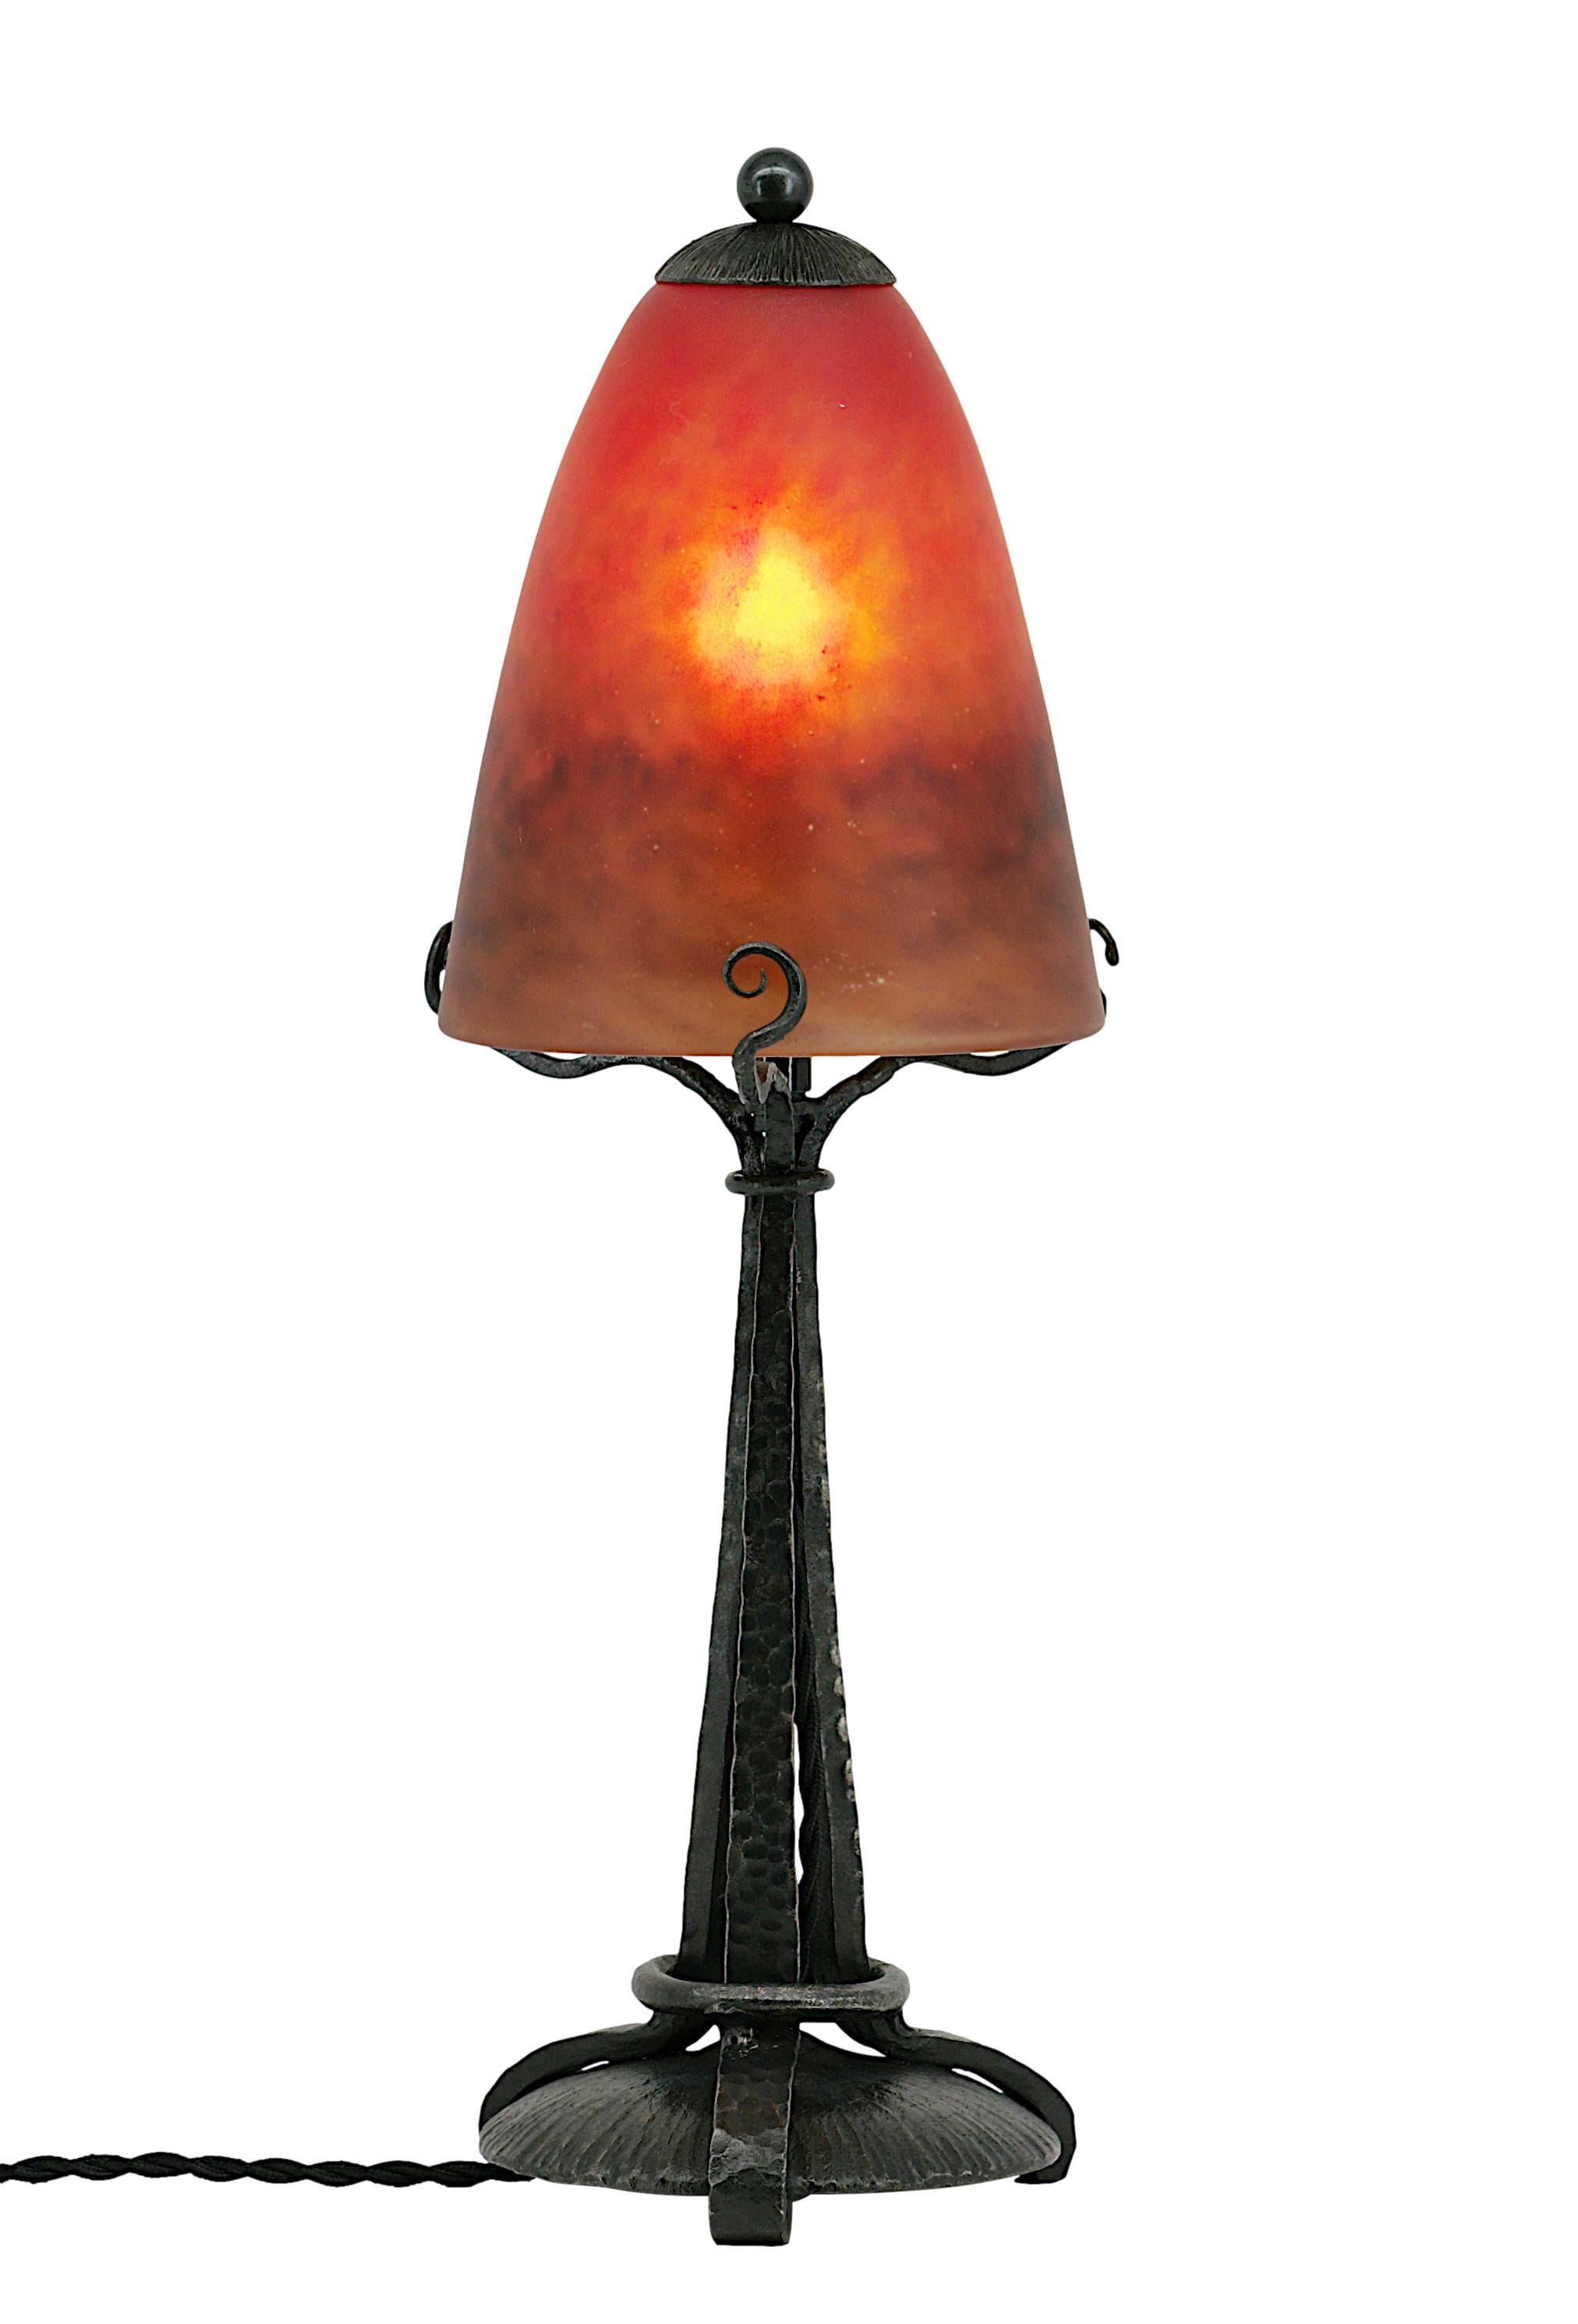 Charles Schneider French Art Deco Lamp, 1924-1928 In Excellent Condition For Sale In Saint-Amans-des-Cots, FR